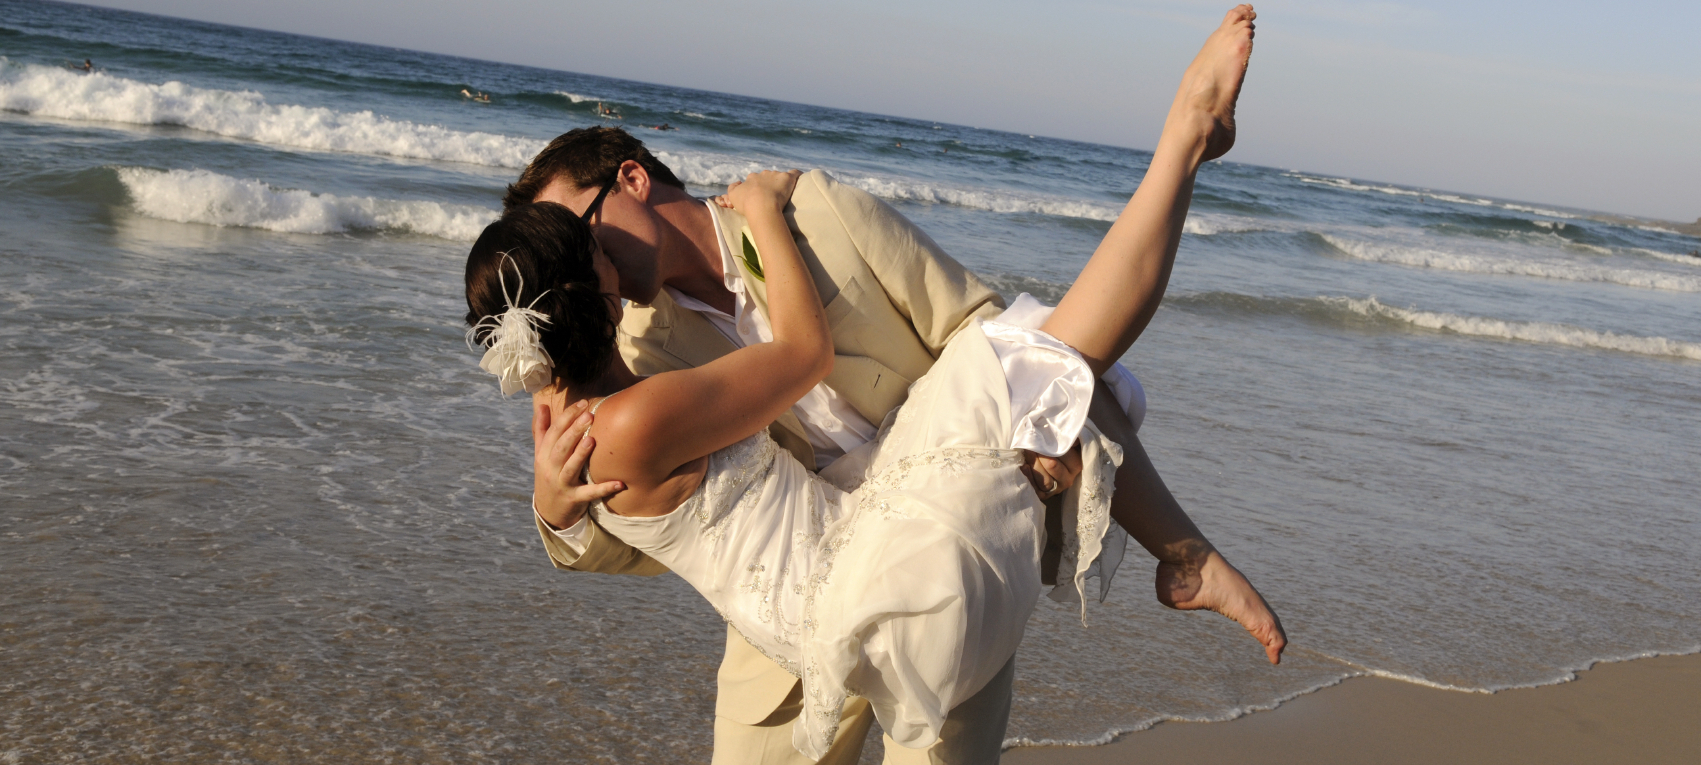 Top Hotels in Myrtle Beach to Have Your Wedding